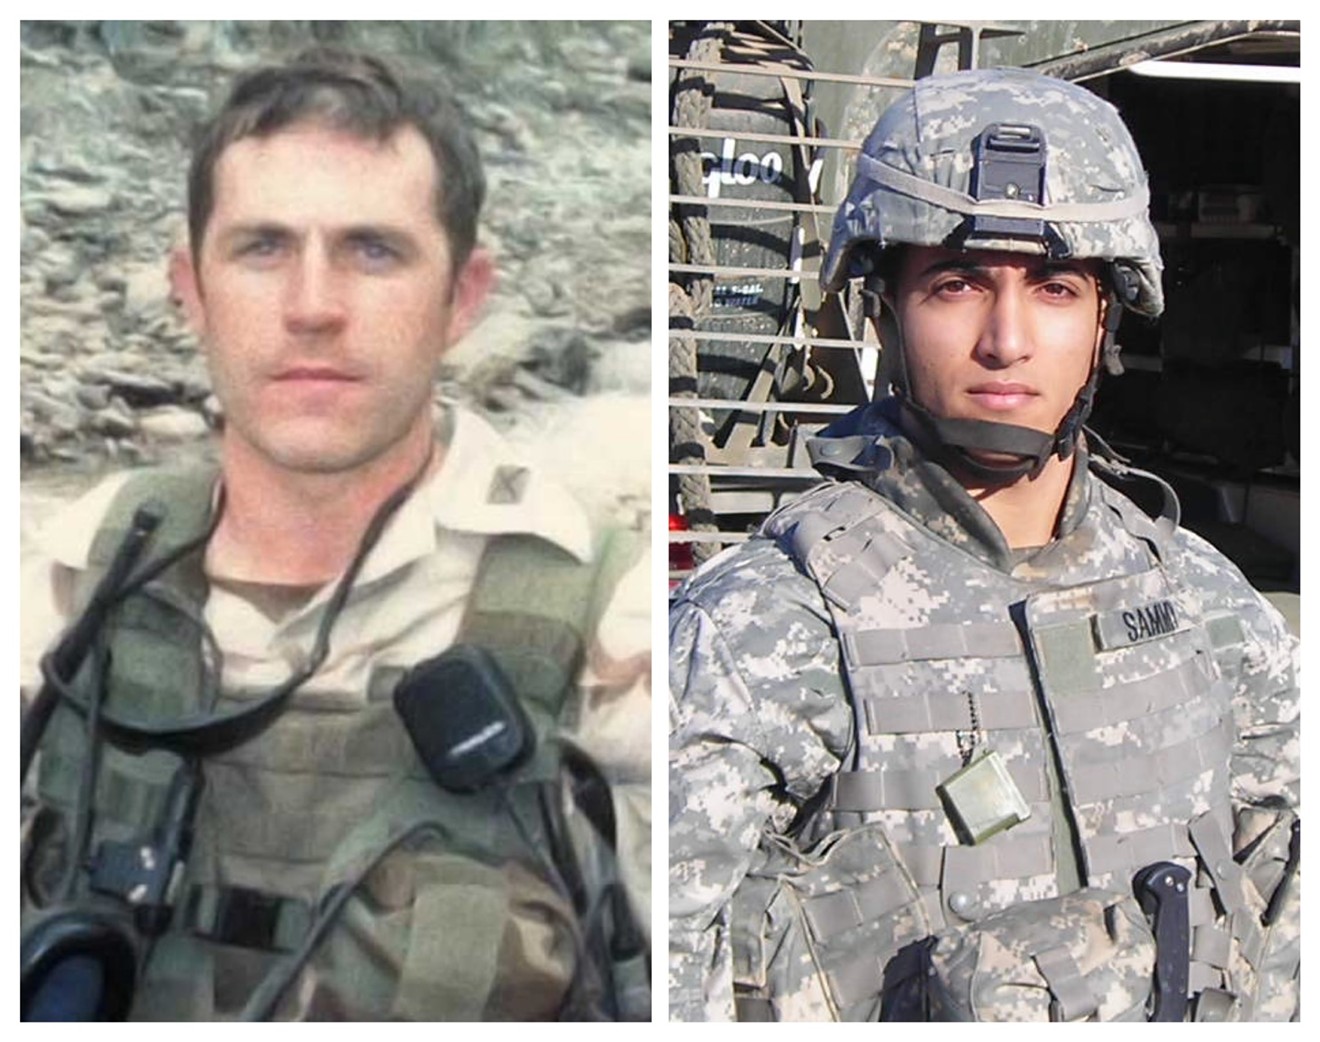 Jason Crow served combat tours in both Iraq and Afghanistan; Maytham Alshadood served as a combat interpreter in Iraq.